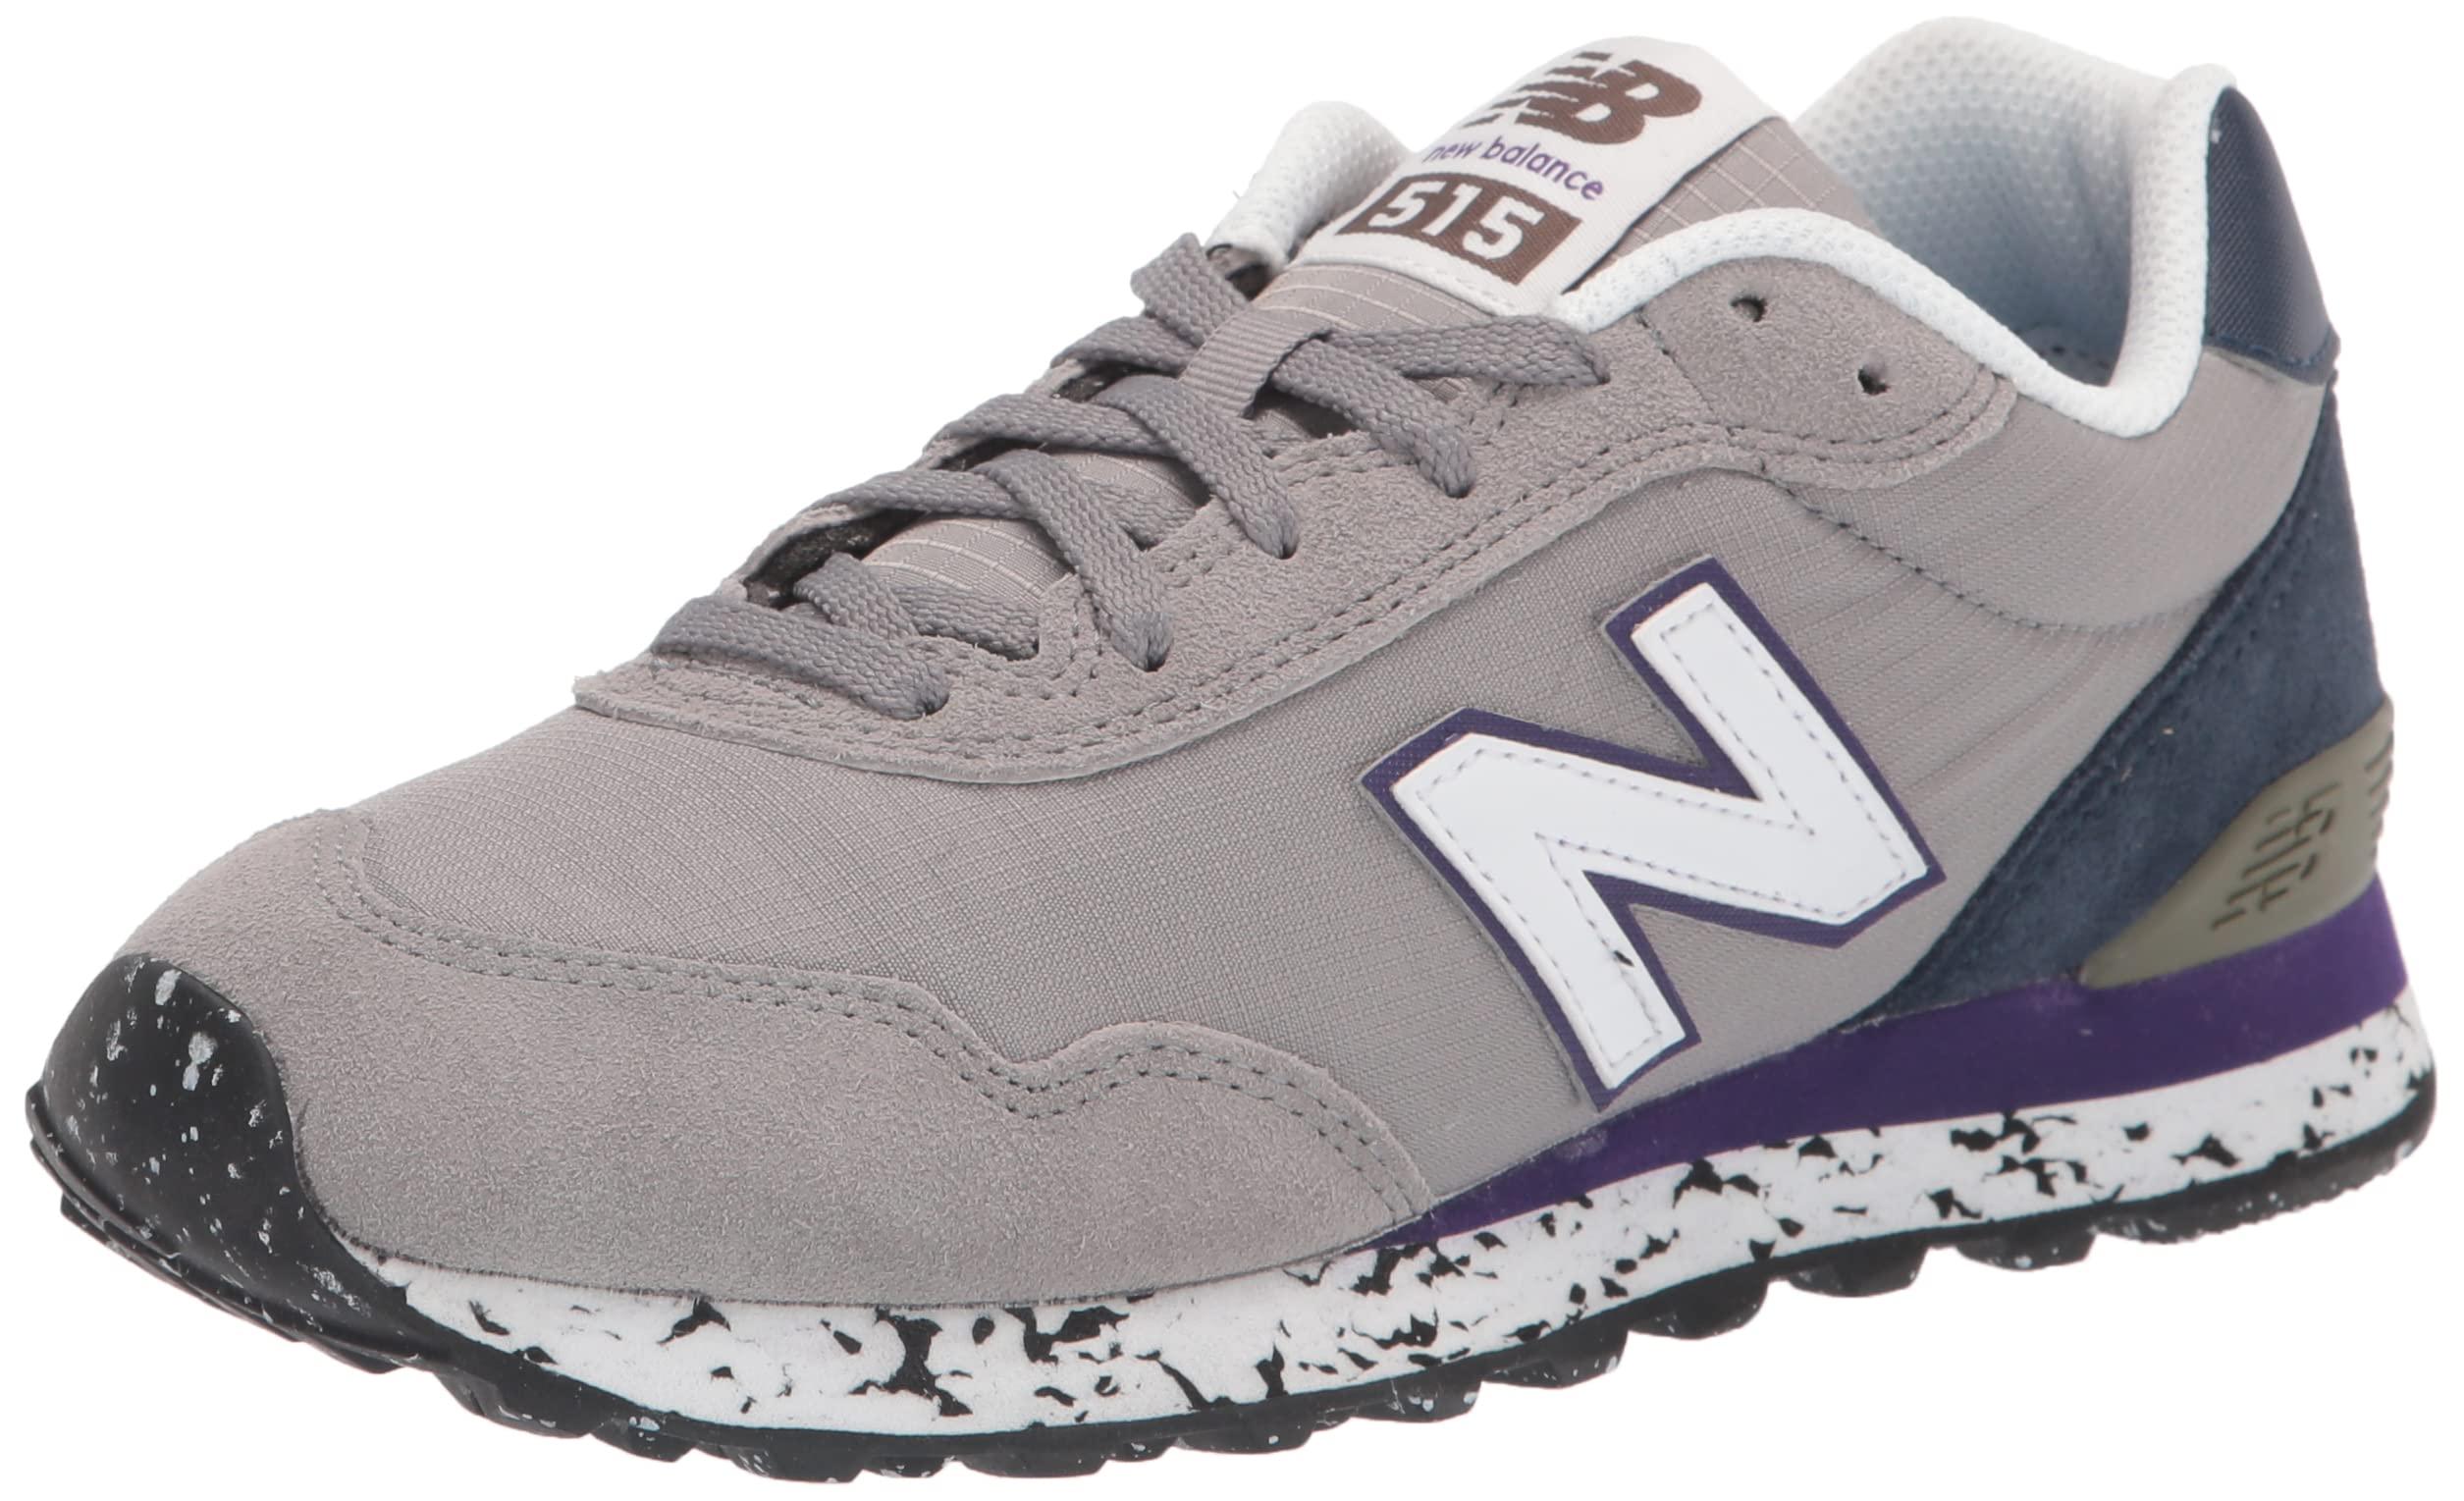 New Balance Suede 515 V3 Sneaker in Metallic for Men - Save 34% | Lyst